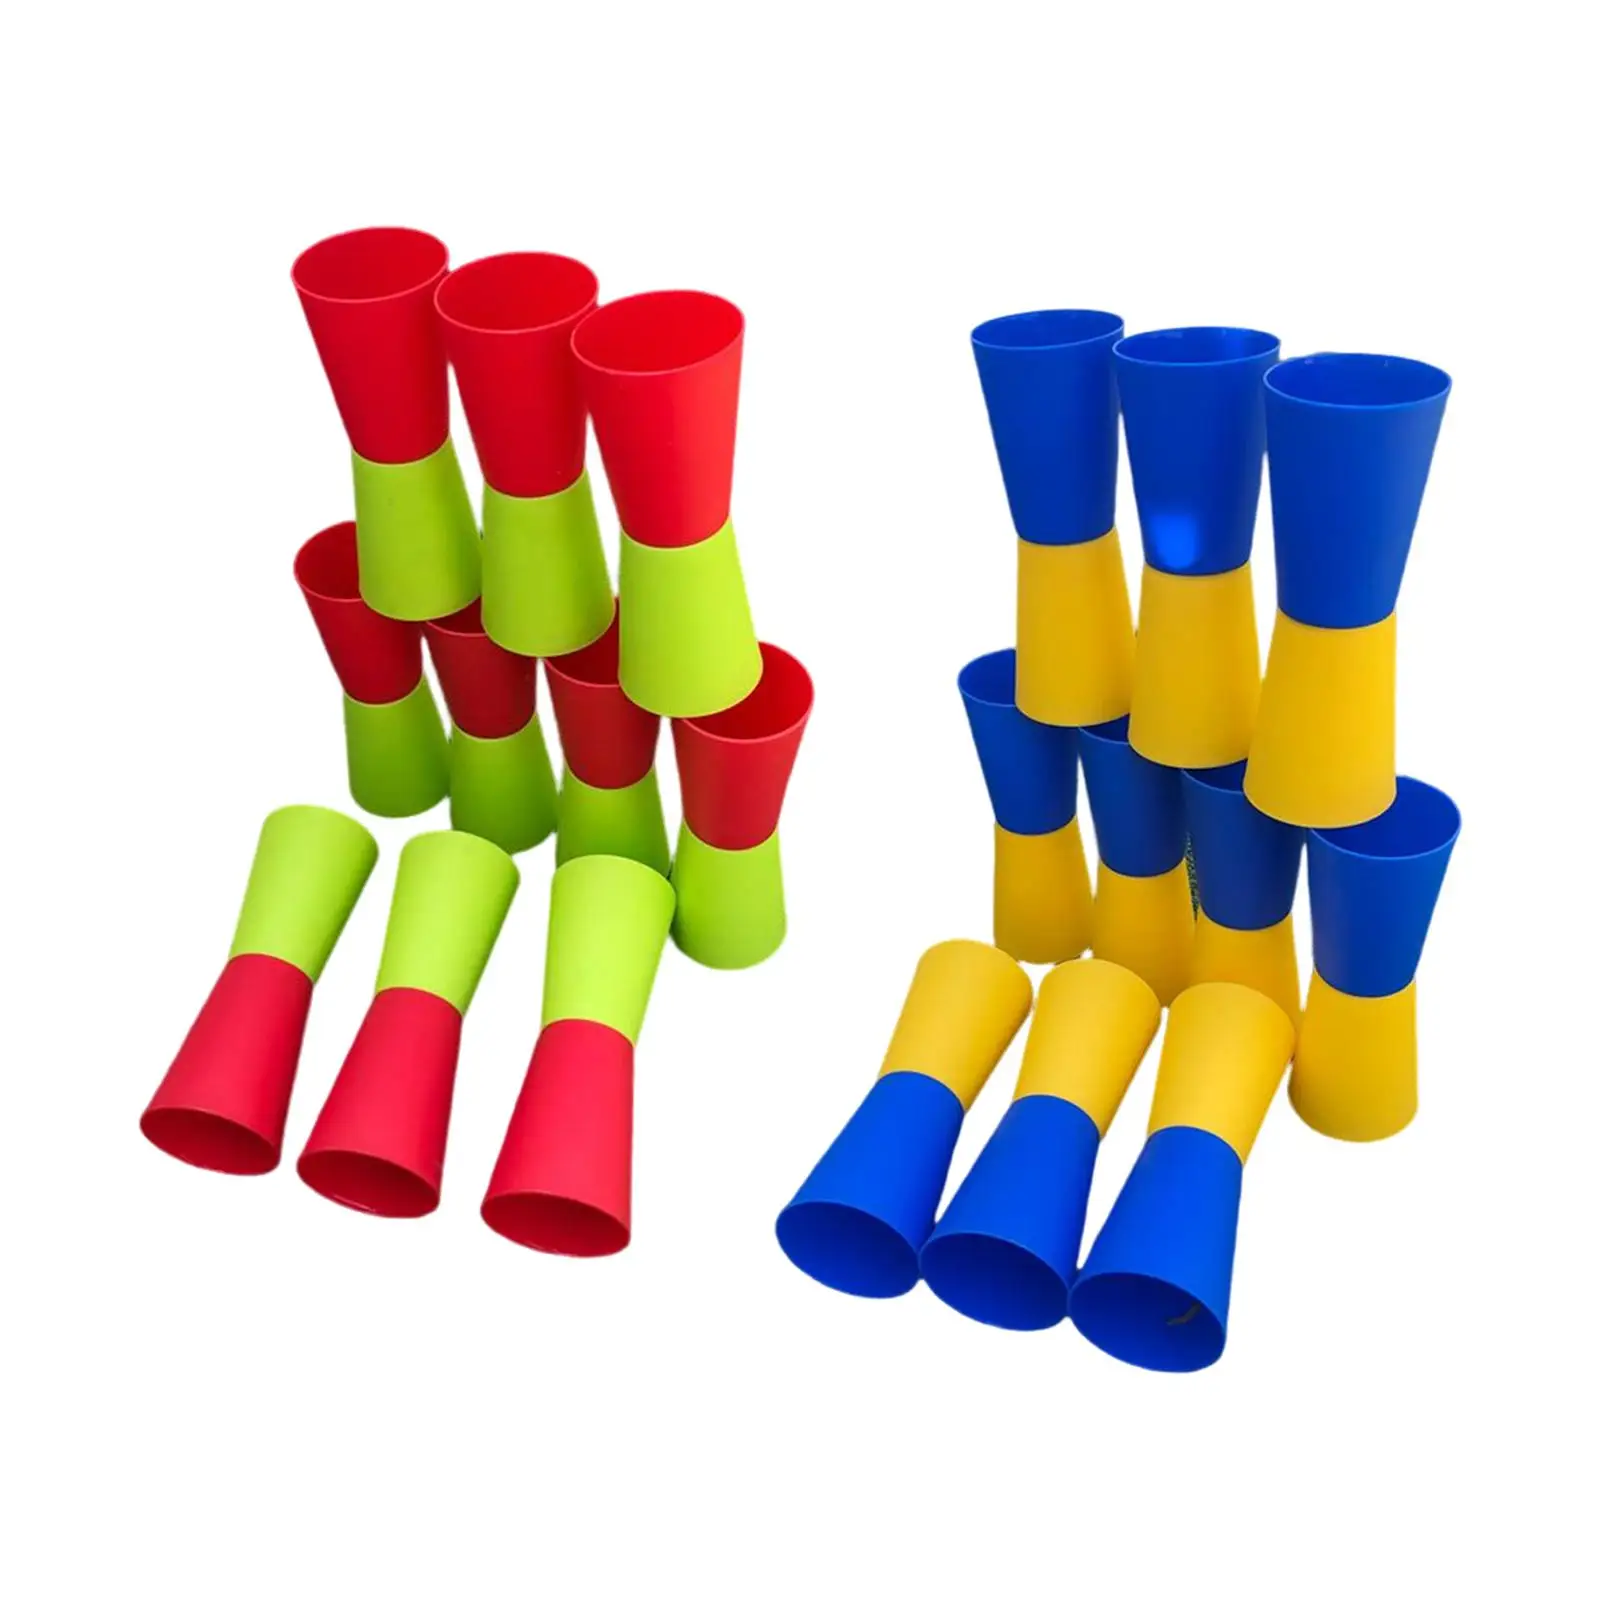 10x Cups Speed Agility Training Body Coordination Physical Fitness Running Sport Equipment Reversed Cups for Events Indoor